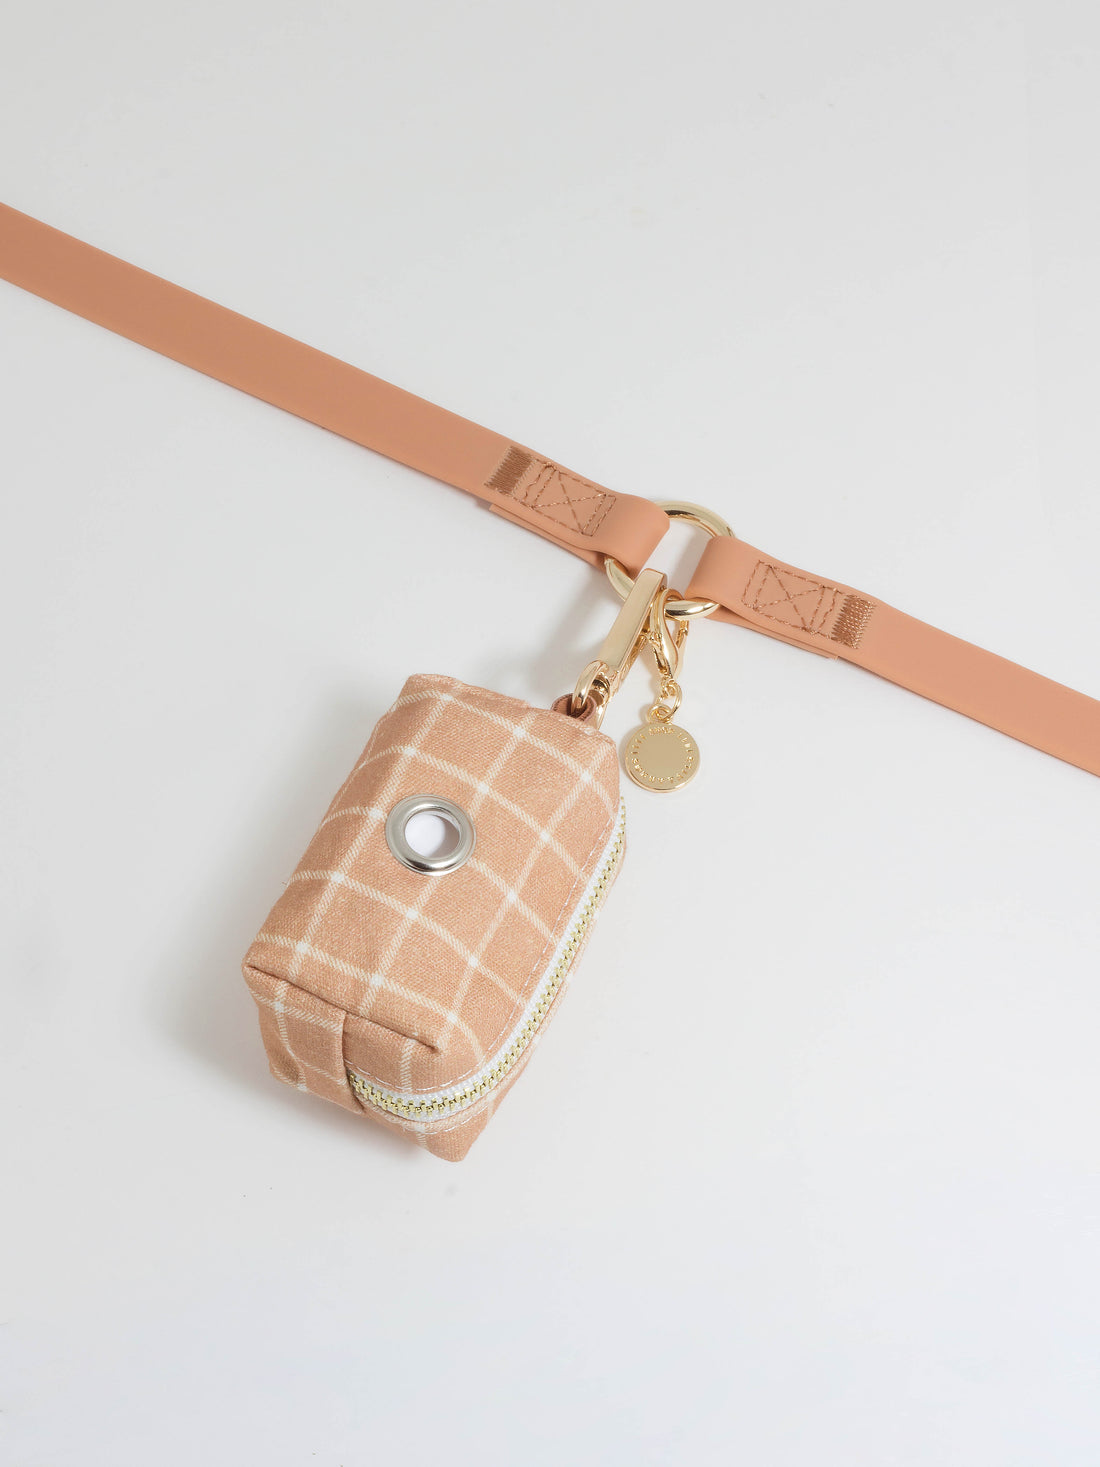 I can't find purse extender straps that are the right length - can someone  point me in the right direction? (more details in comments) : r/Louisvuitton